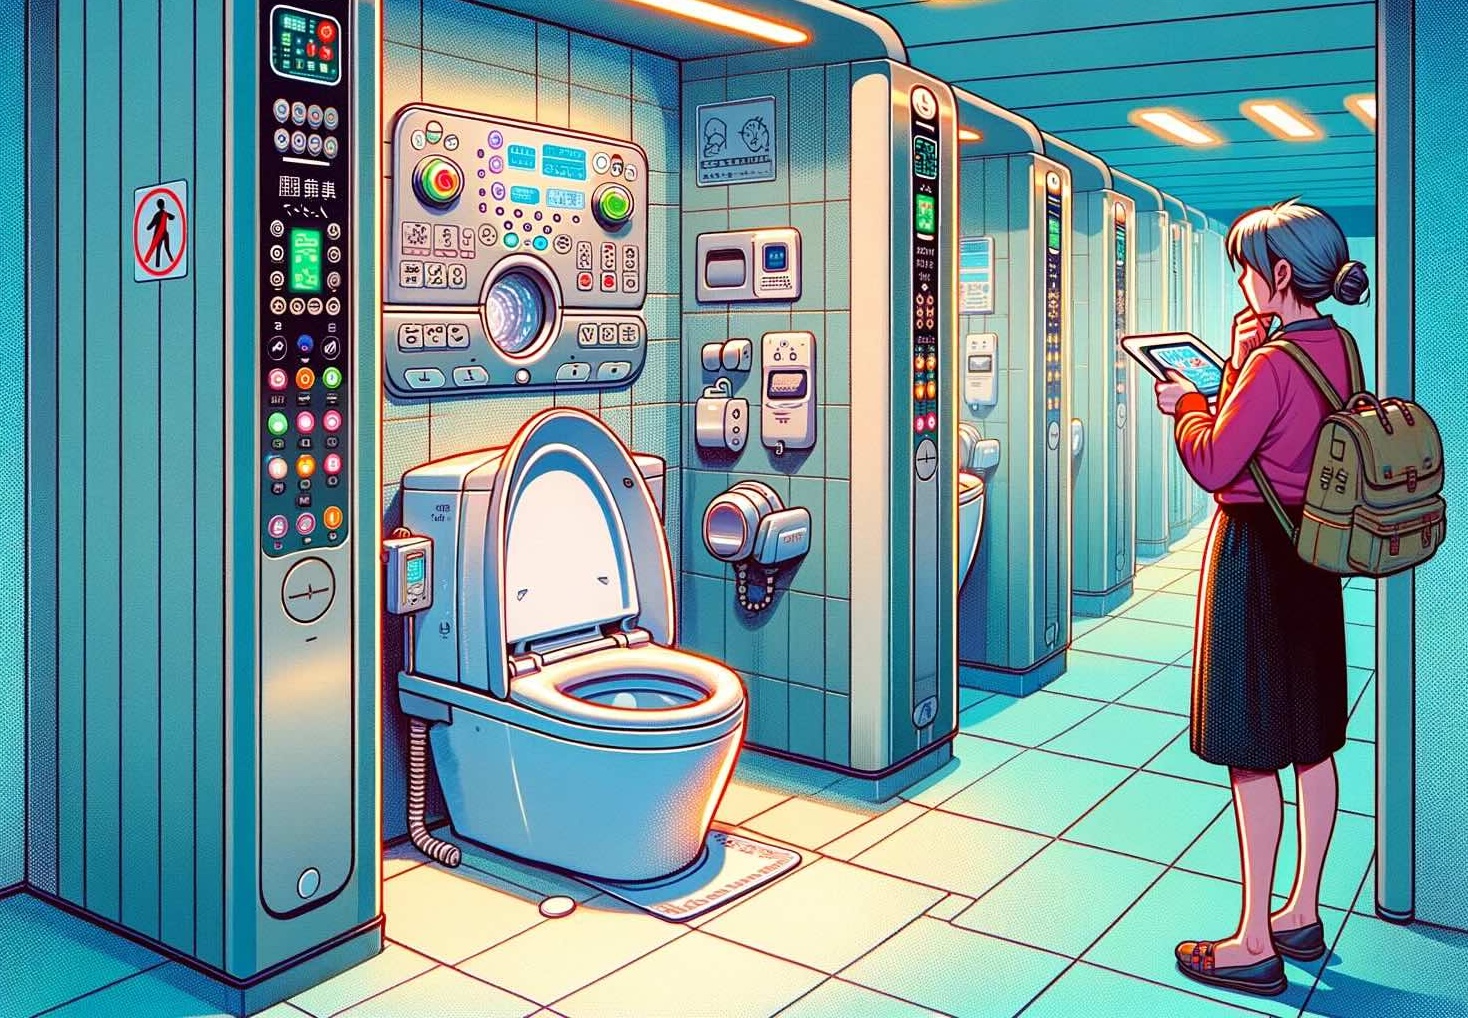 Depicting a scene in a Japanese restroom with a high-tech toilet captures the sense of wonder and intrigue a newcomer might feel when encountering these advanced facilities for the first time. 